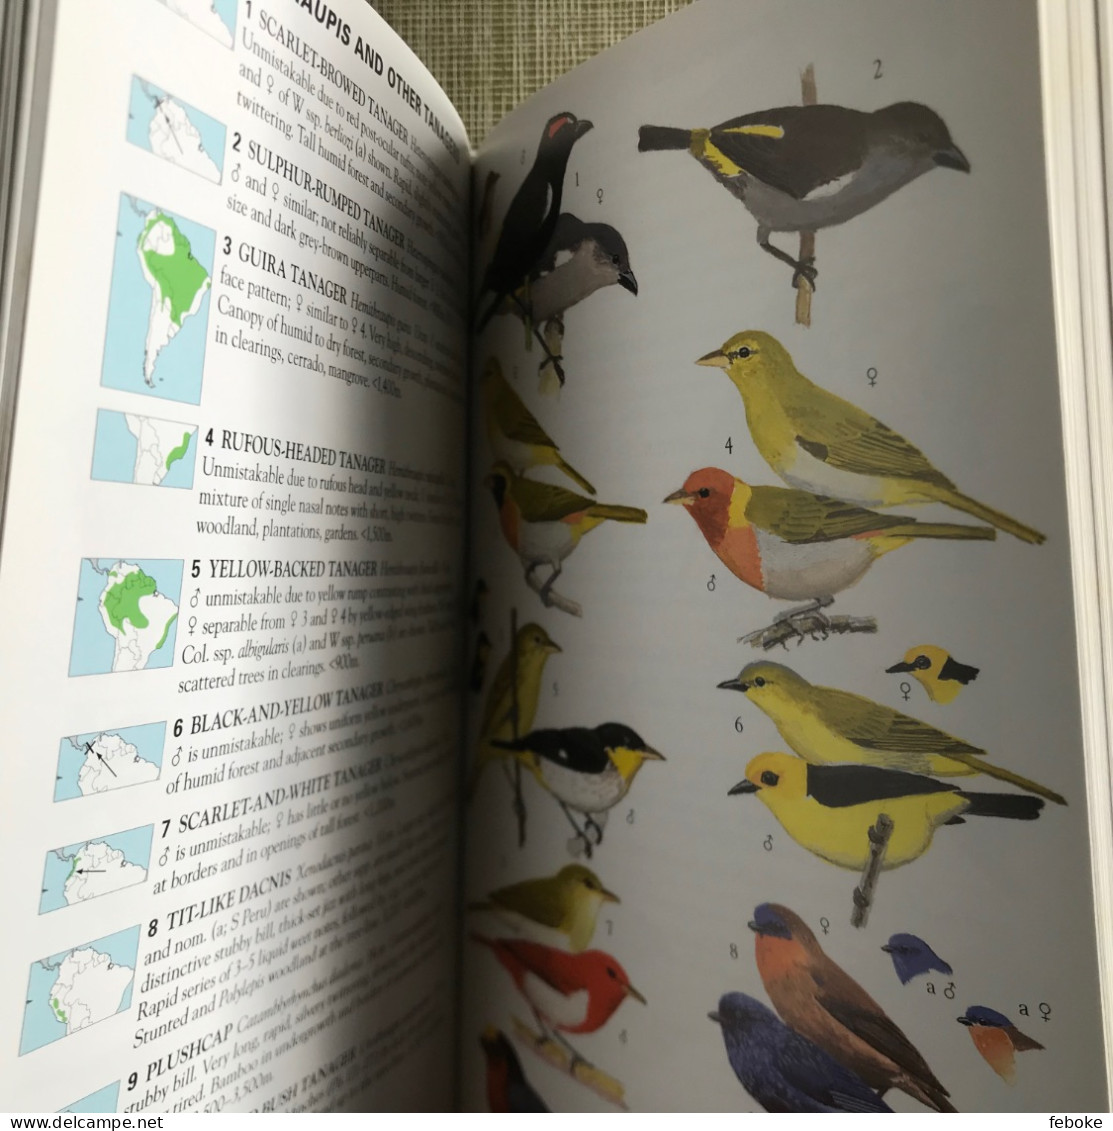 Collins Field Guide to the Birds of South America: Passerines: From Sapayoa to Finches 2015